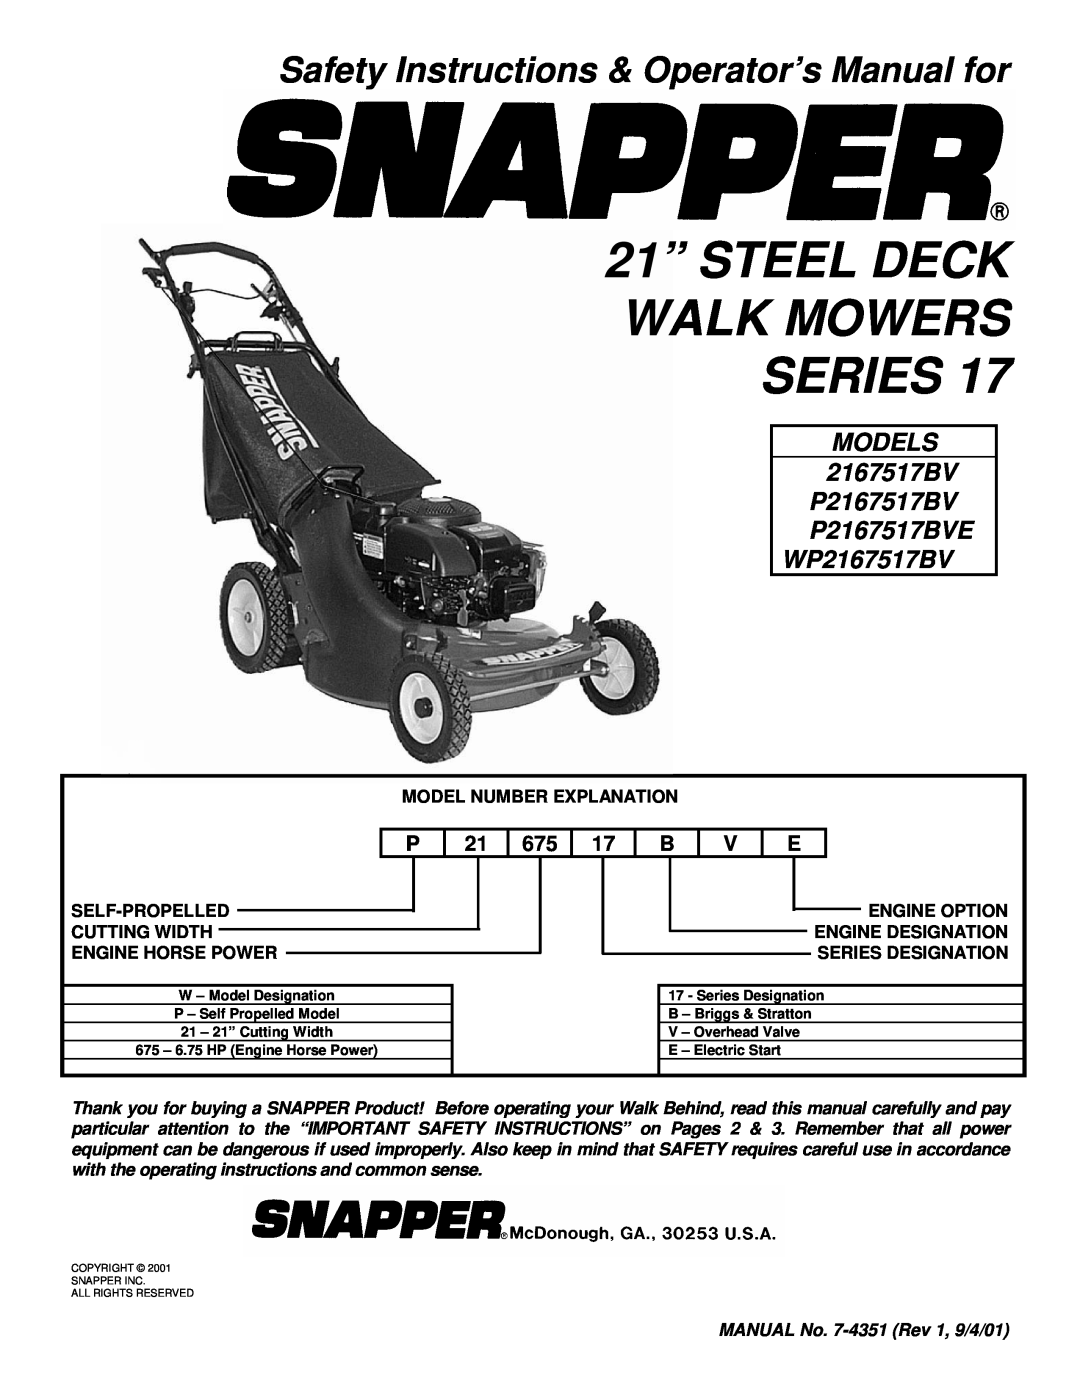 Snapper important safety instructions 21” STEEL DECK WALK MOWERS SERIES, Safety Instructions & Operator’s Manual for 